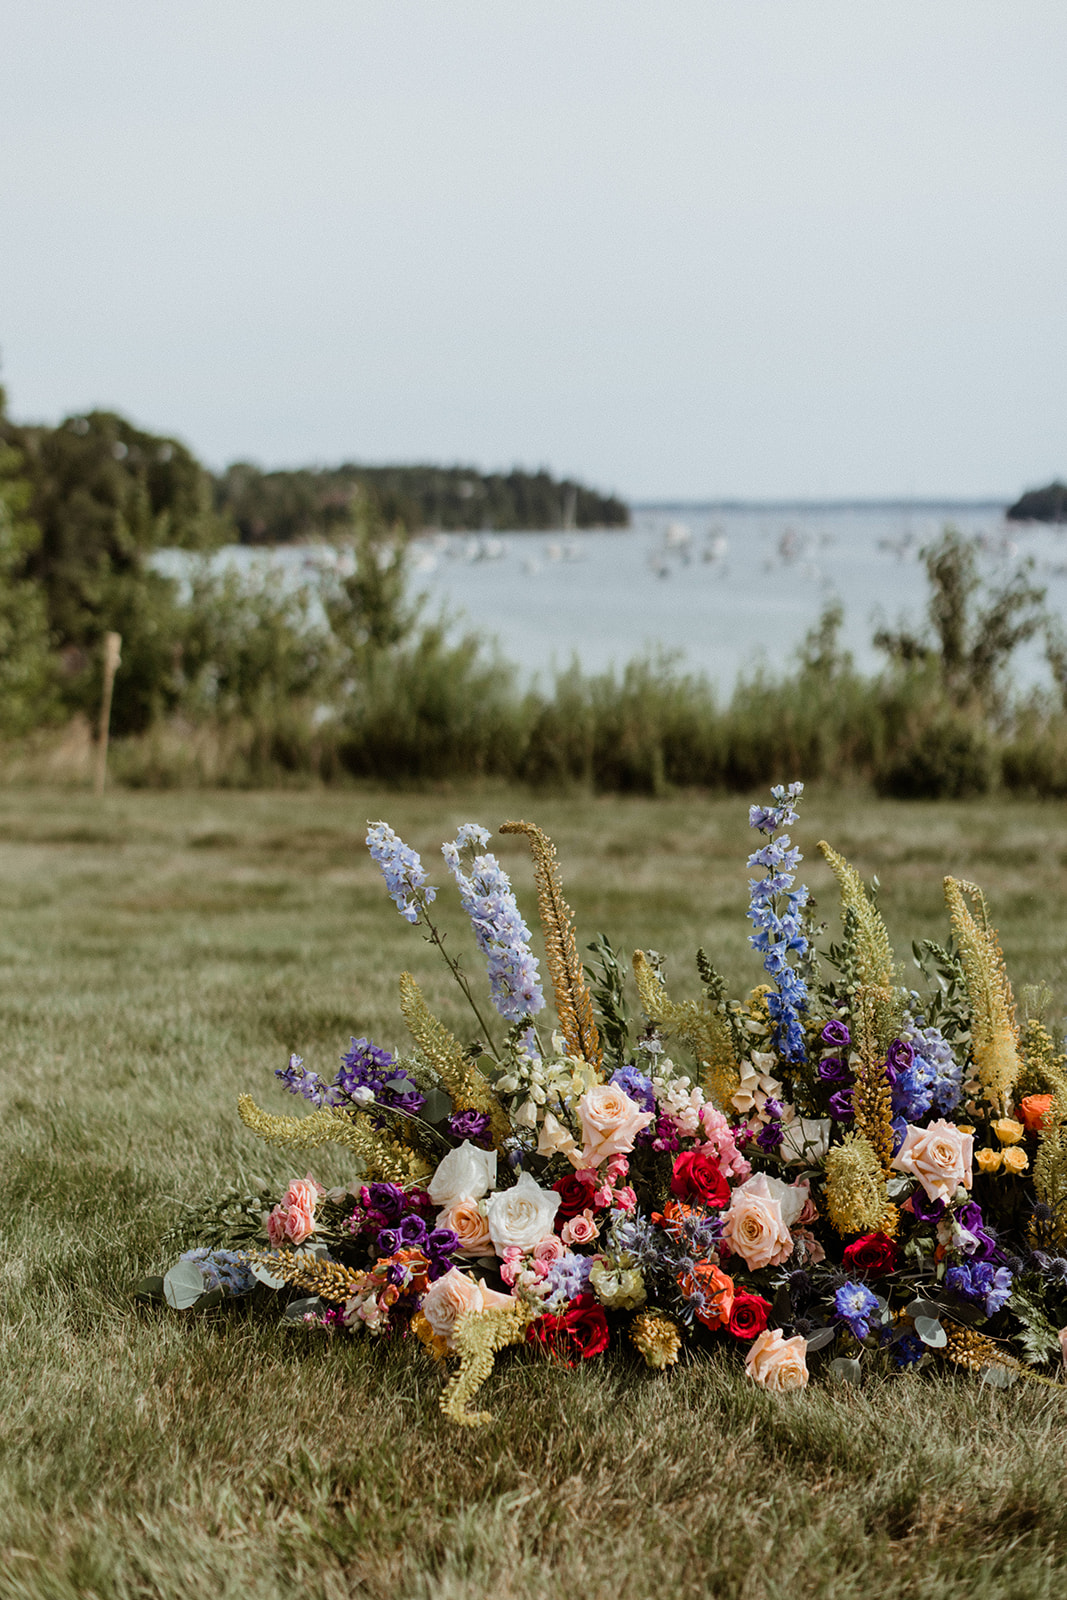 stunning flowers have a great view of the Maine harbor